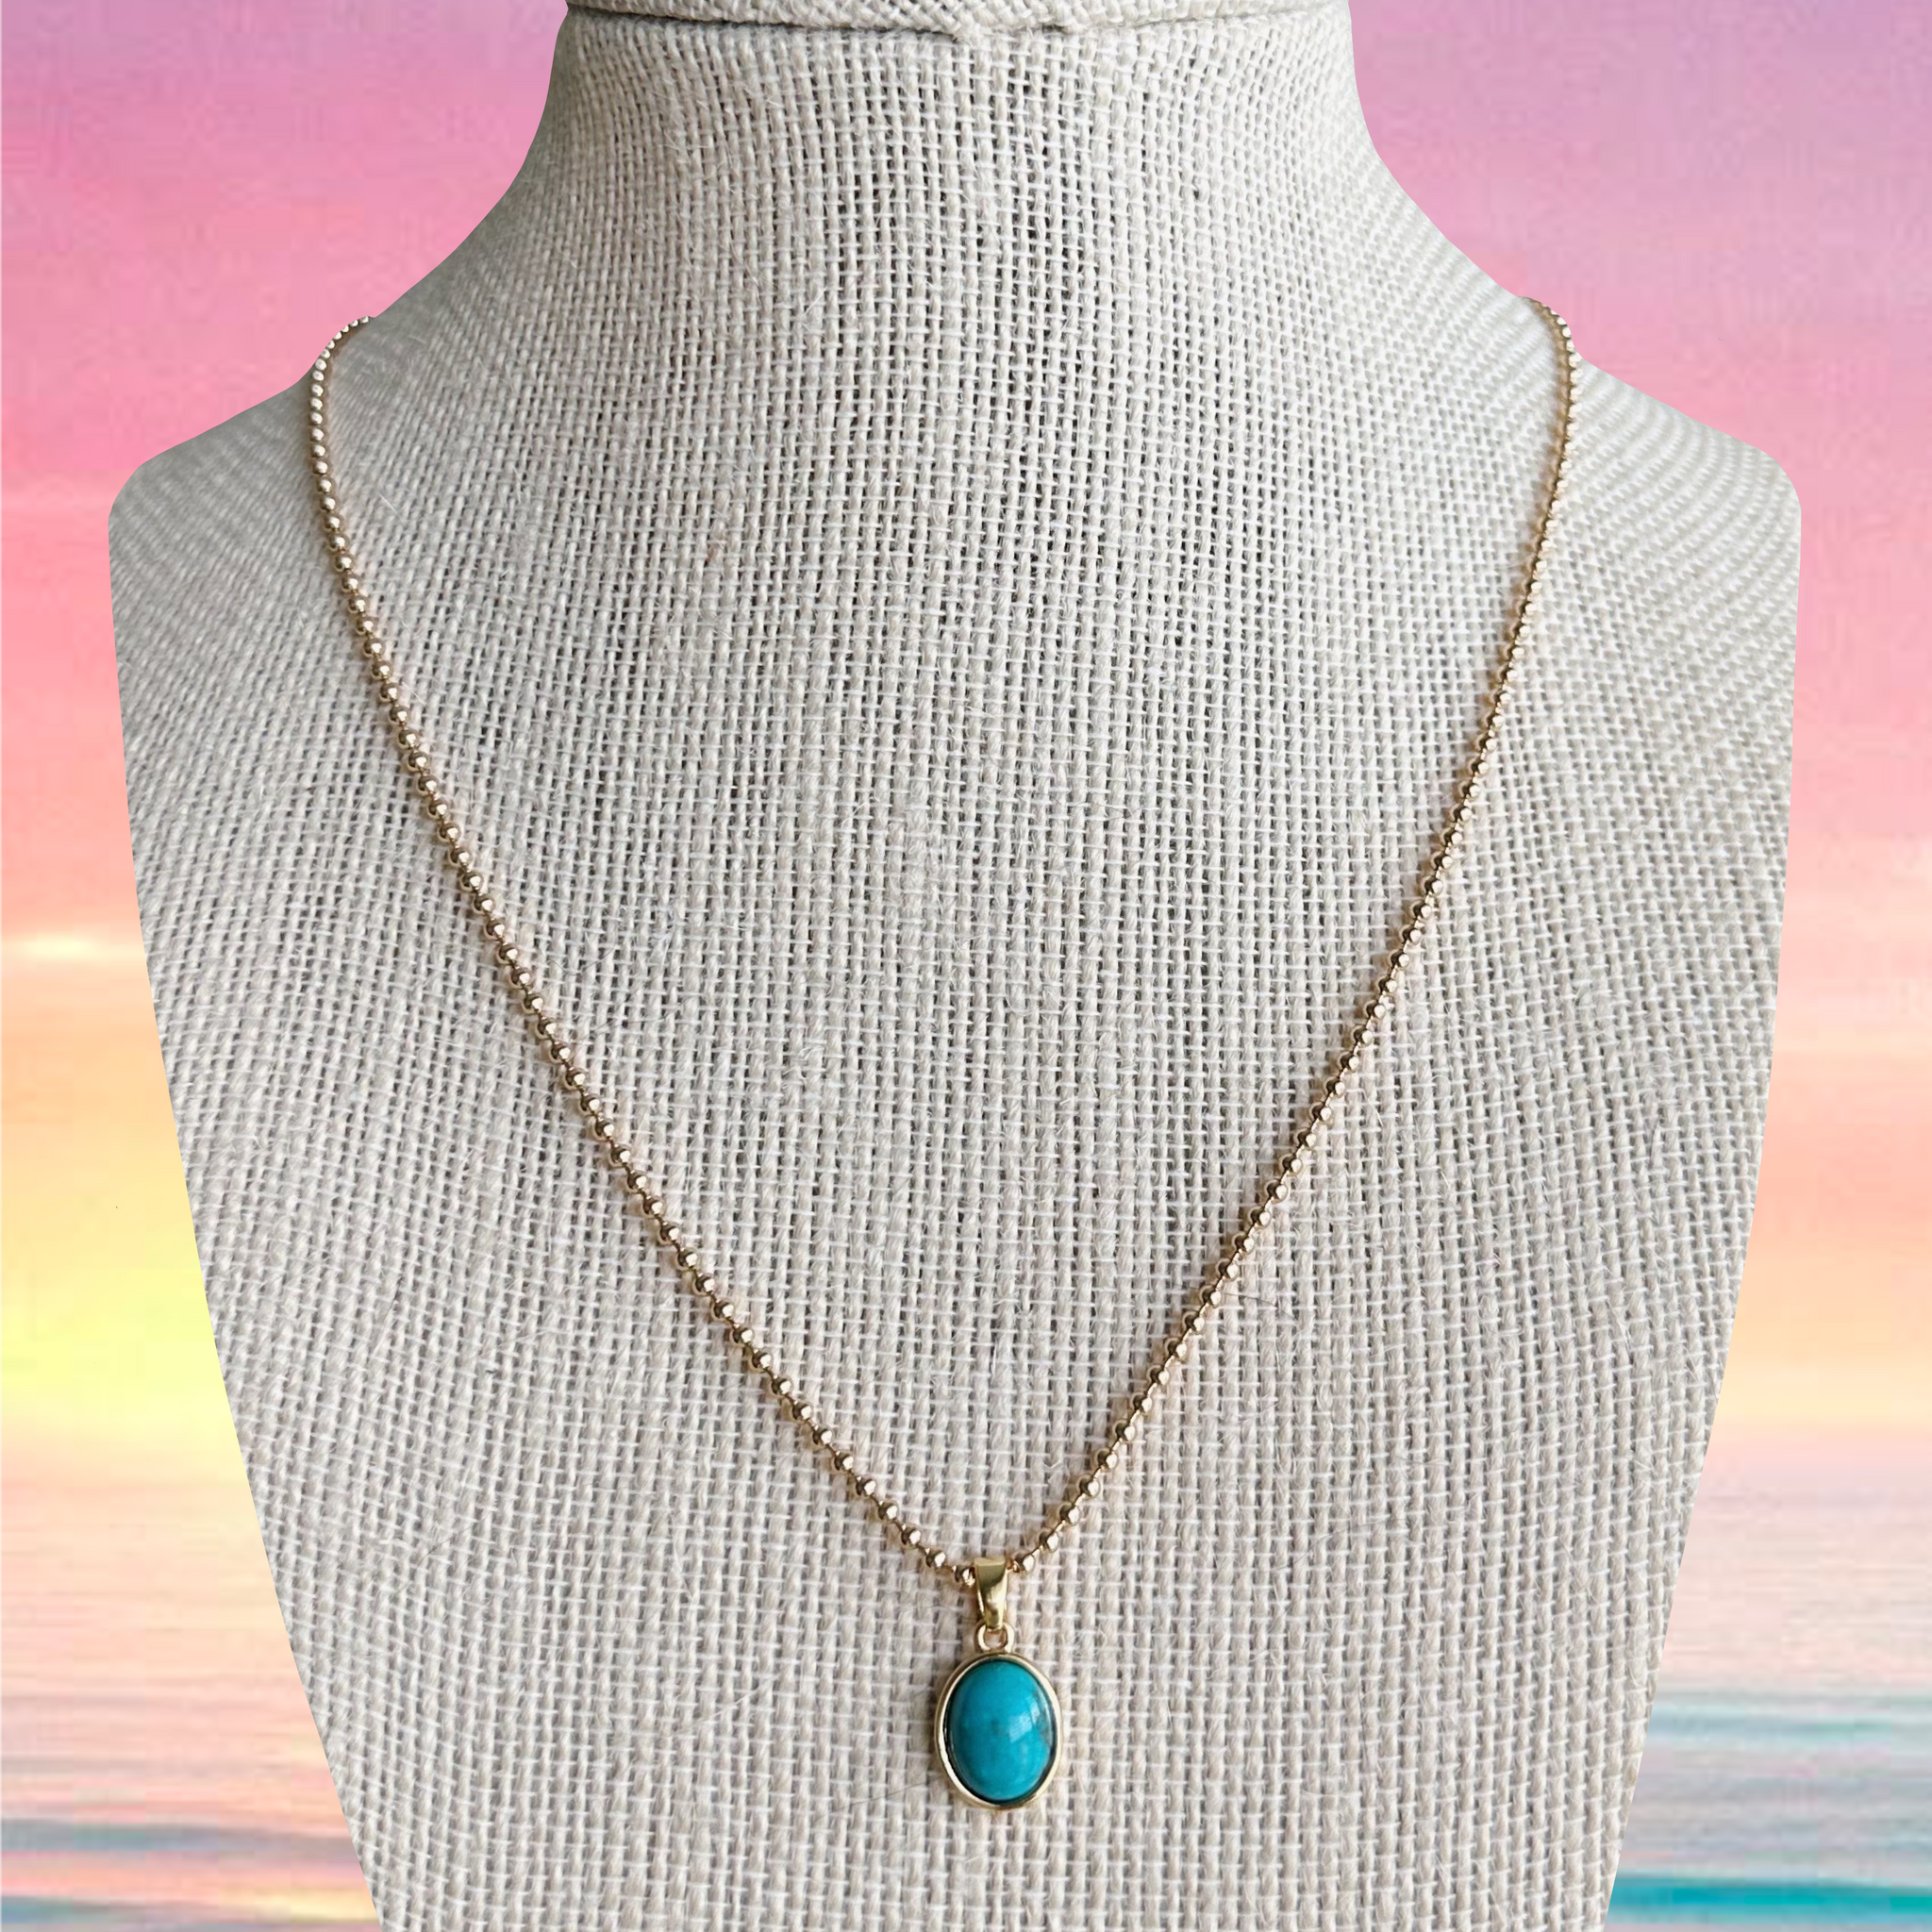 TEAL STONE NECKLACE